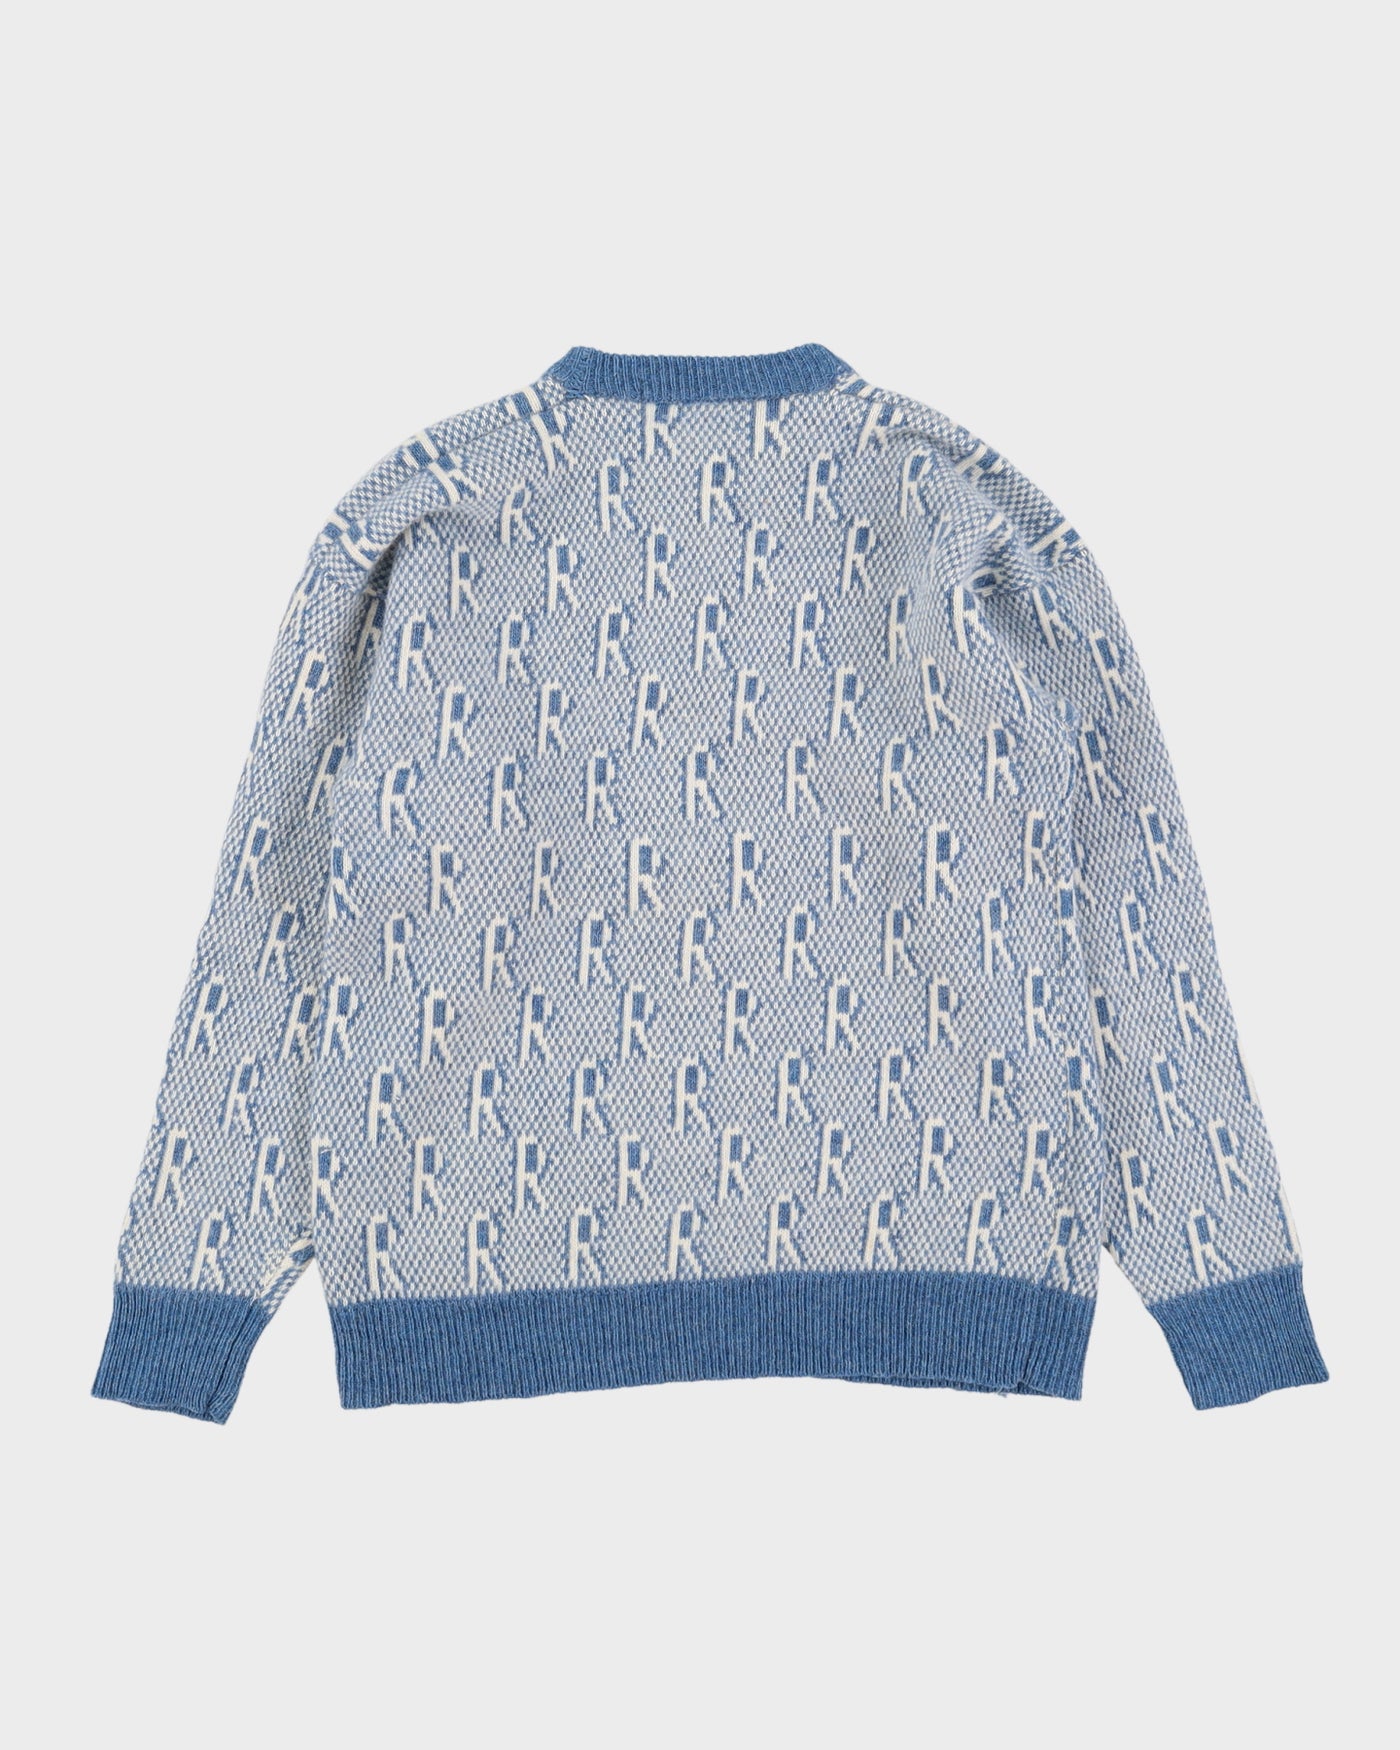 1980s Blue And White R Patterned Knitted Jumper - S